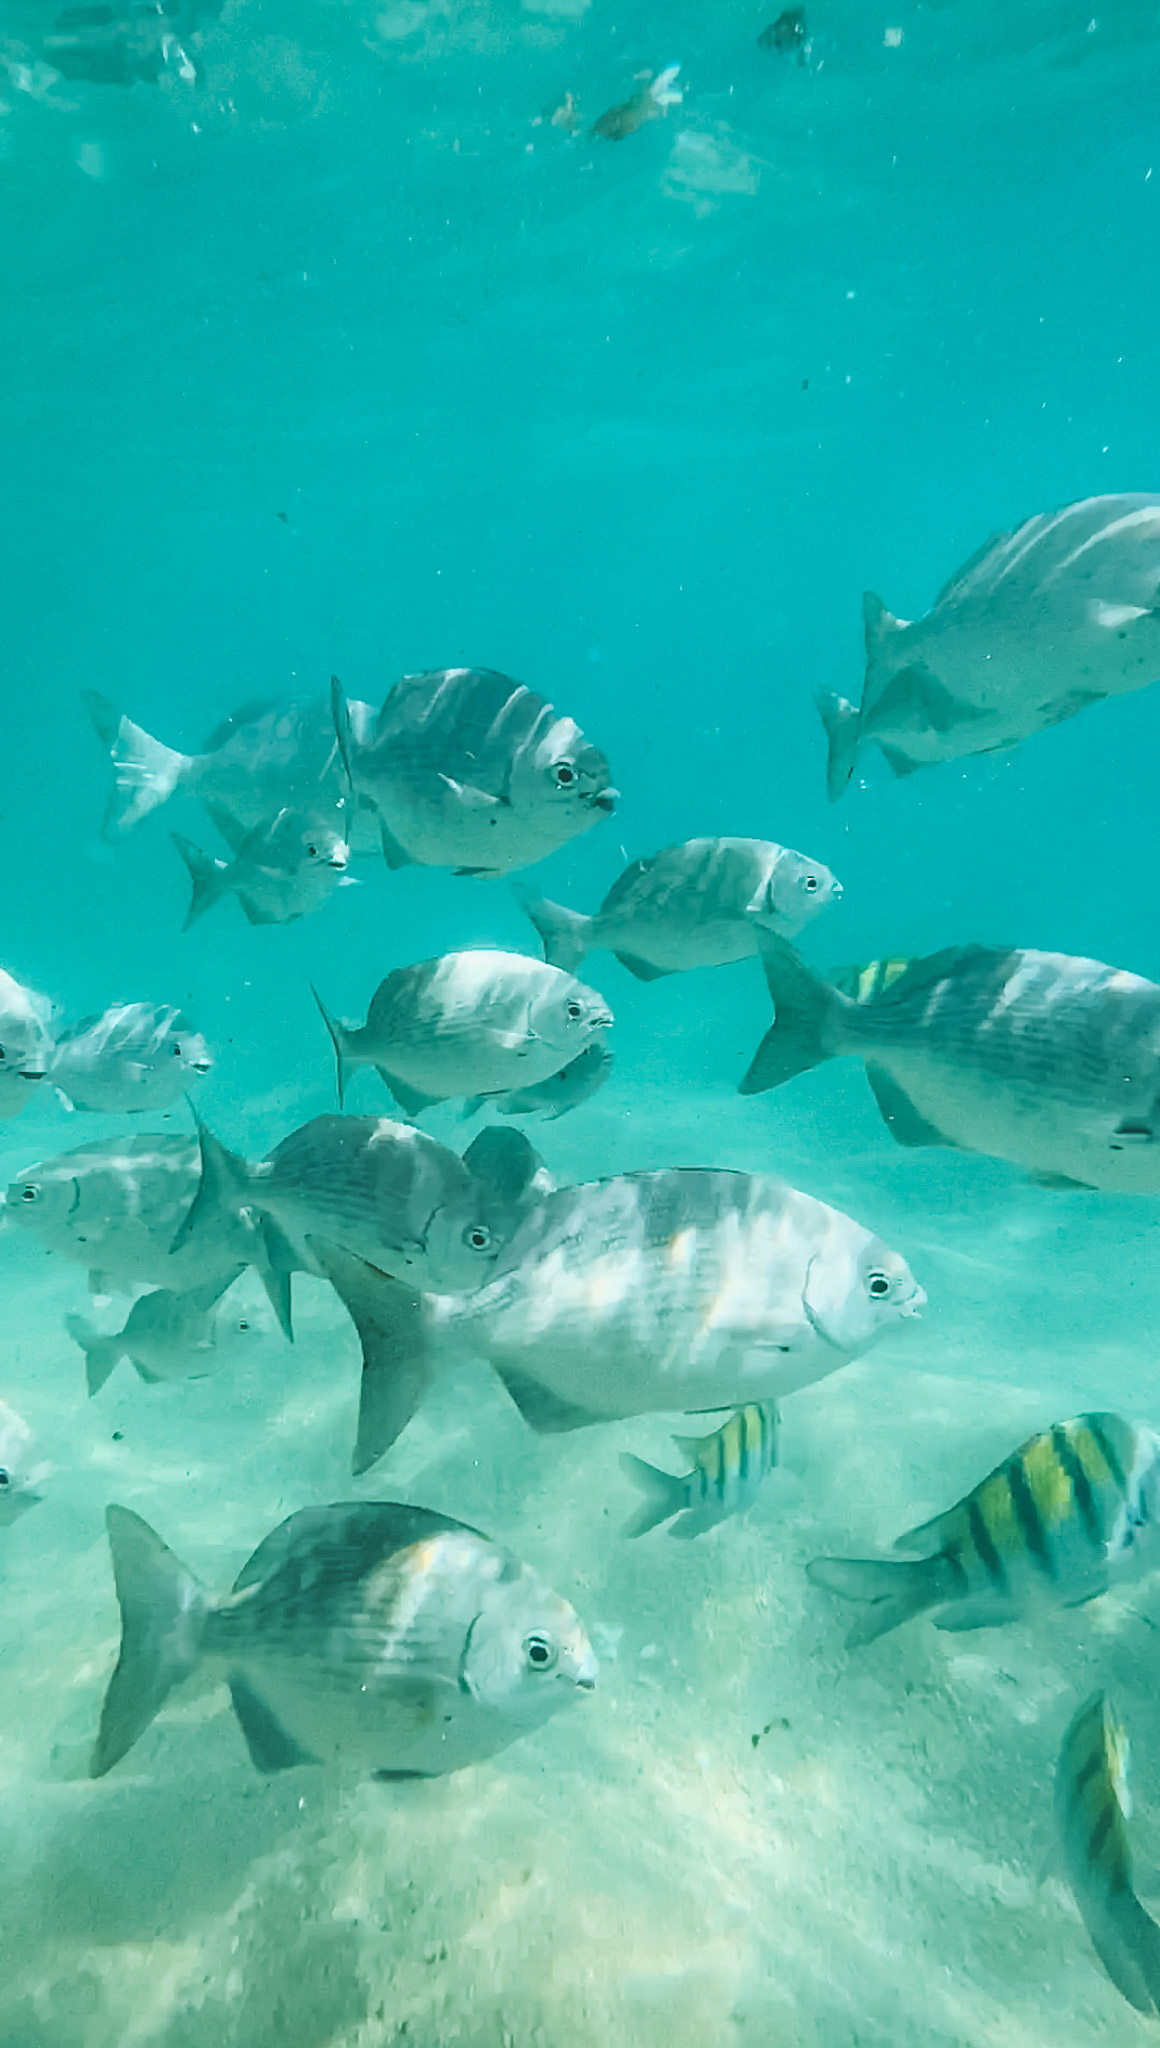 Image of many grey and yellow fish in the sea.